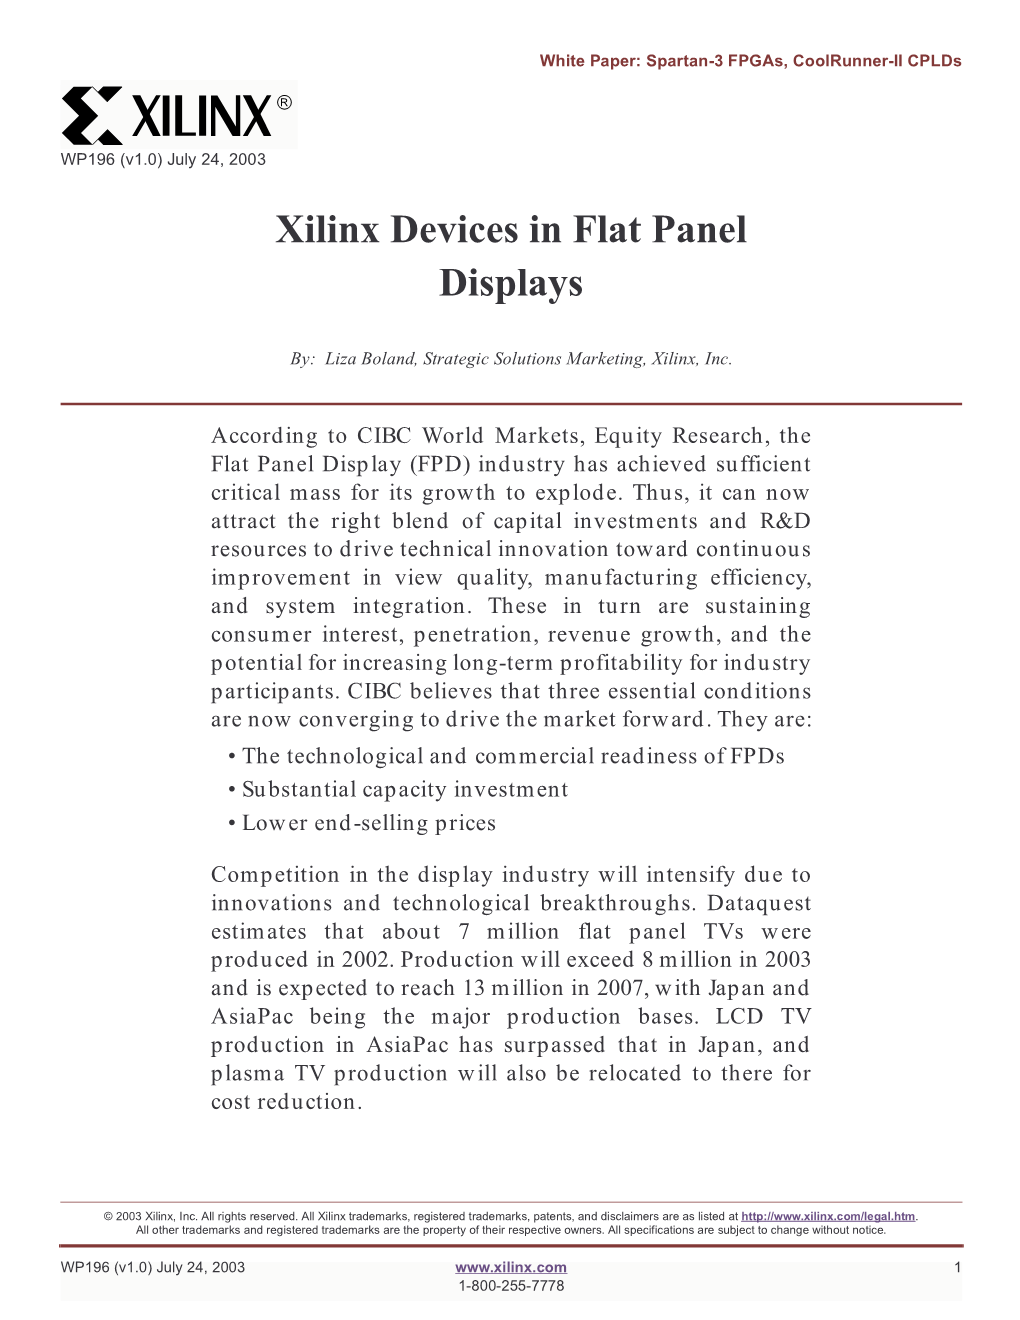 Xilinx WP196 Xilinx Devices in Flat Panel Displays, White Paper